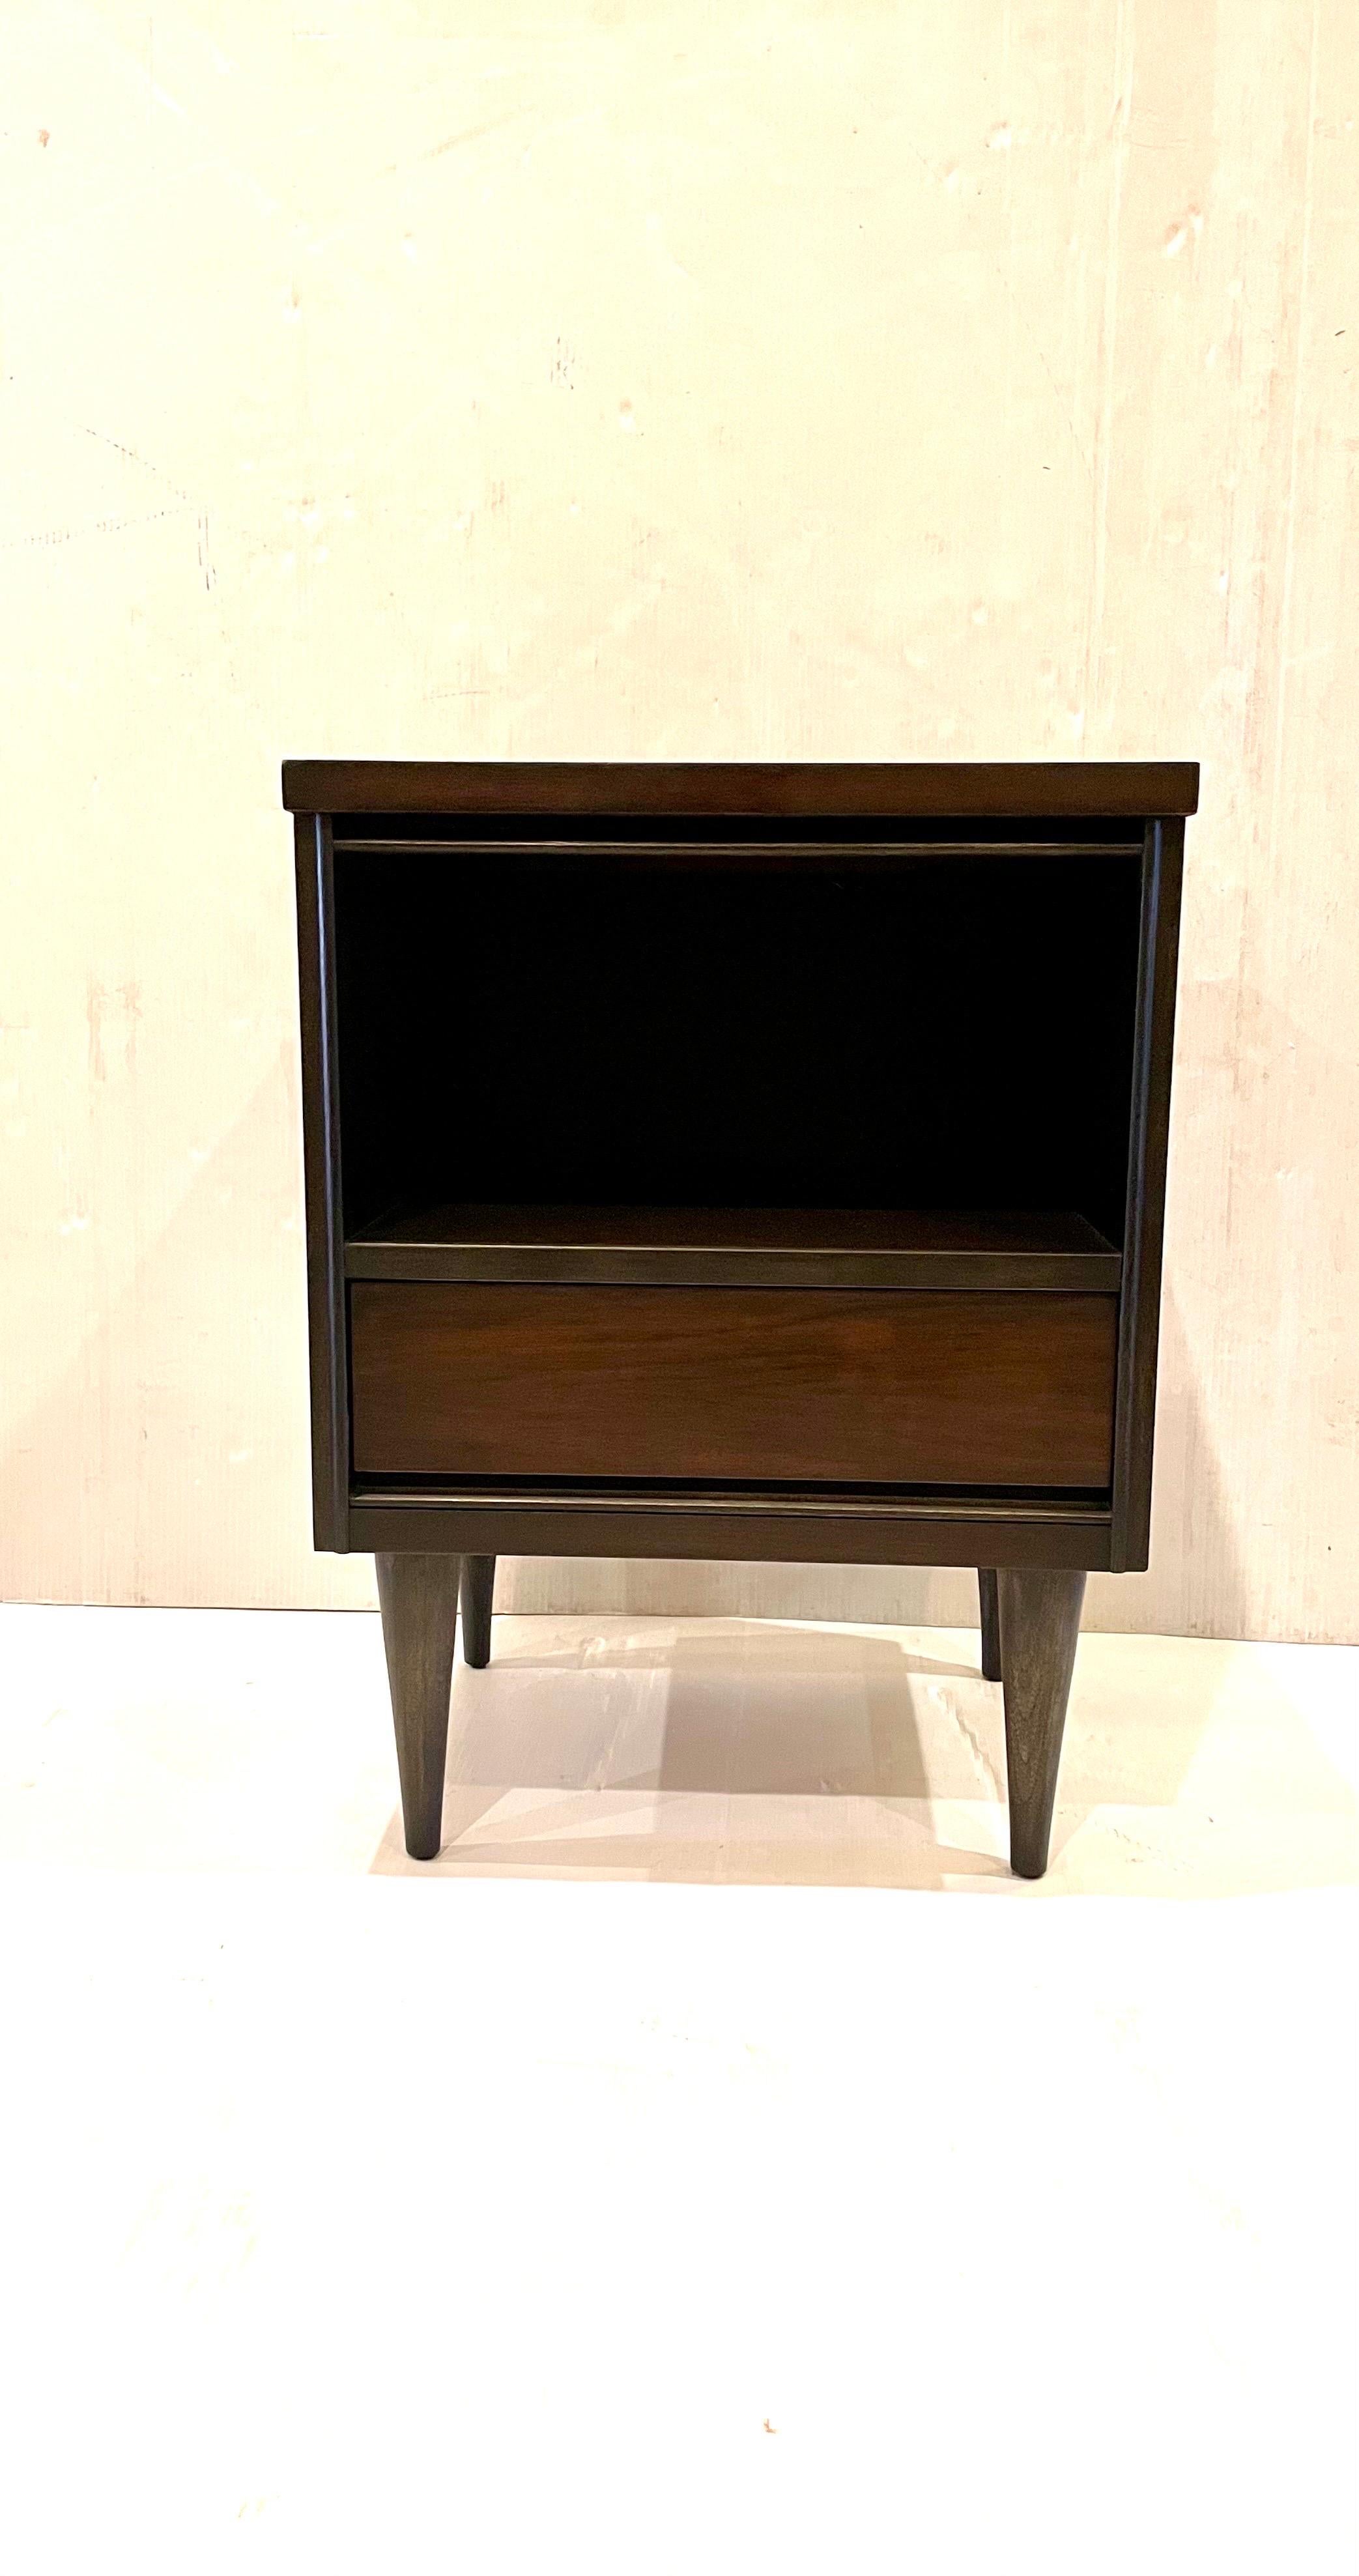 Nice pair of freshly refinished nightstands, nice shape Classic midcentury design in a dark chocolate finish. Single drawer solid and sturdy.